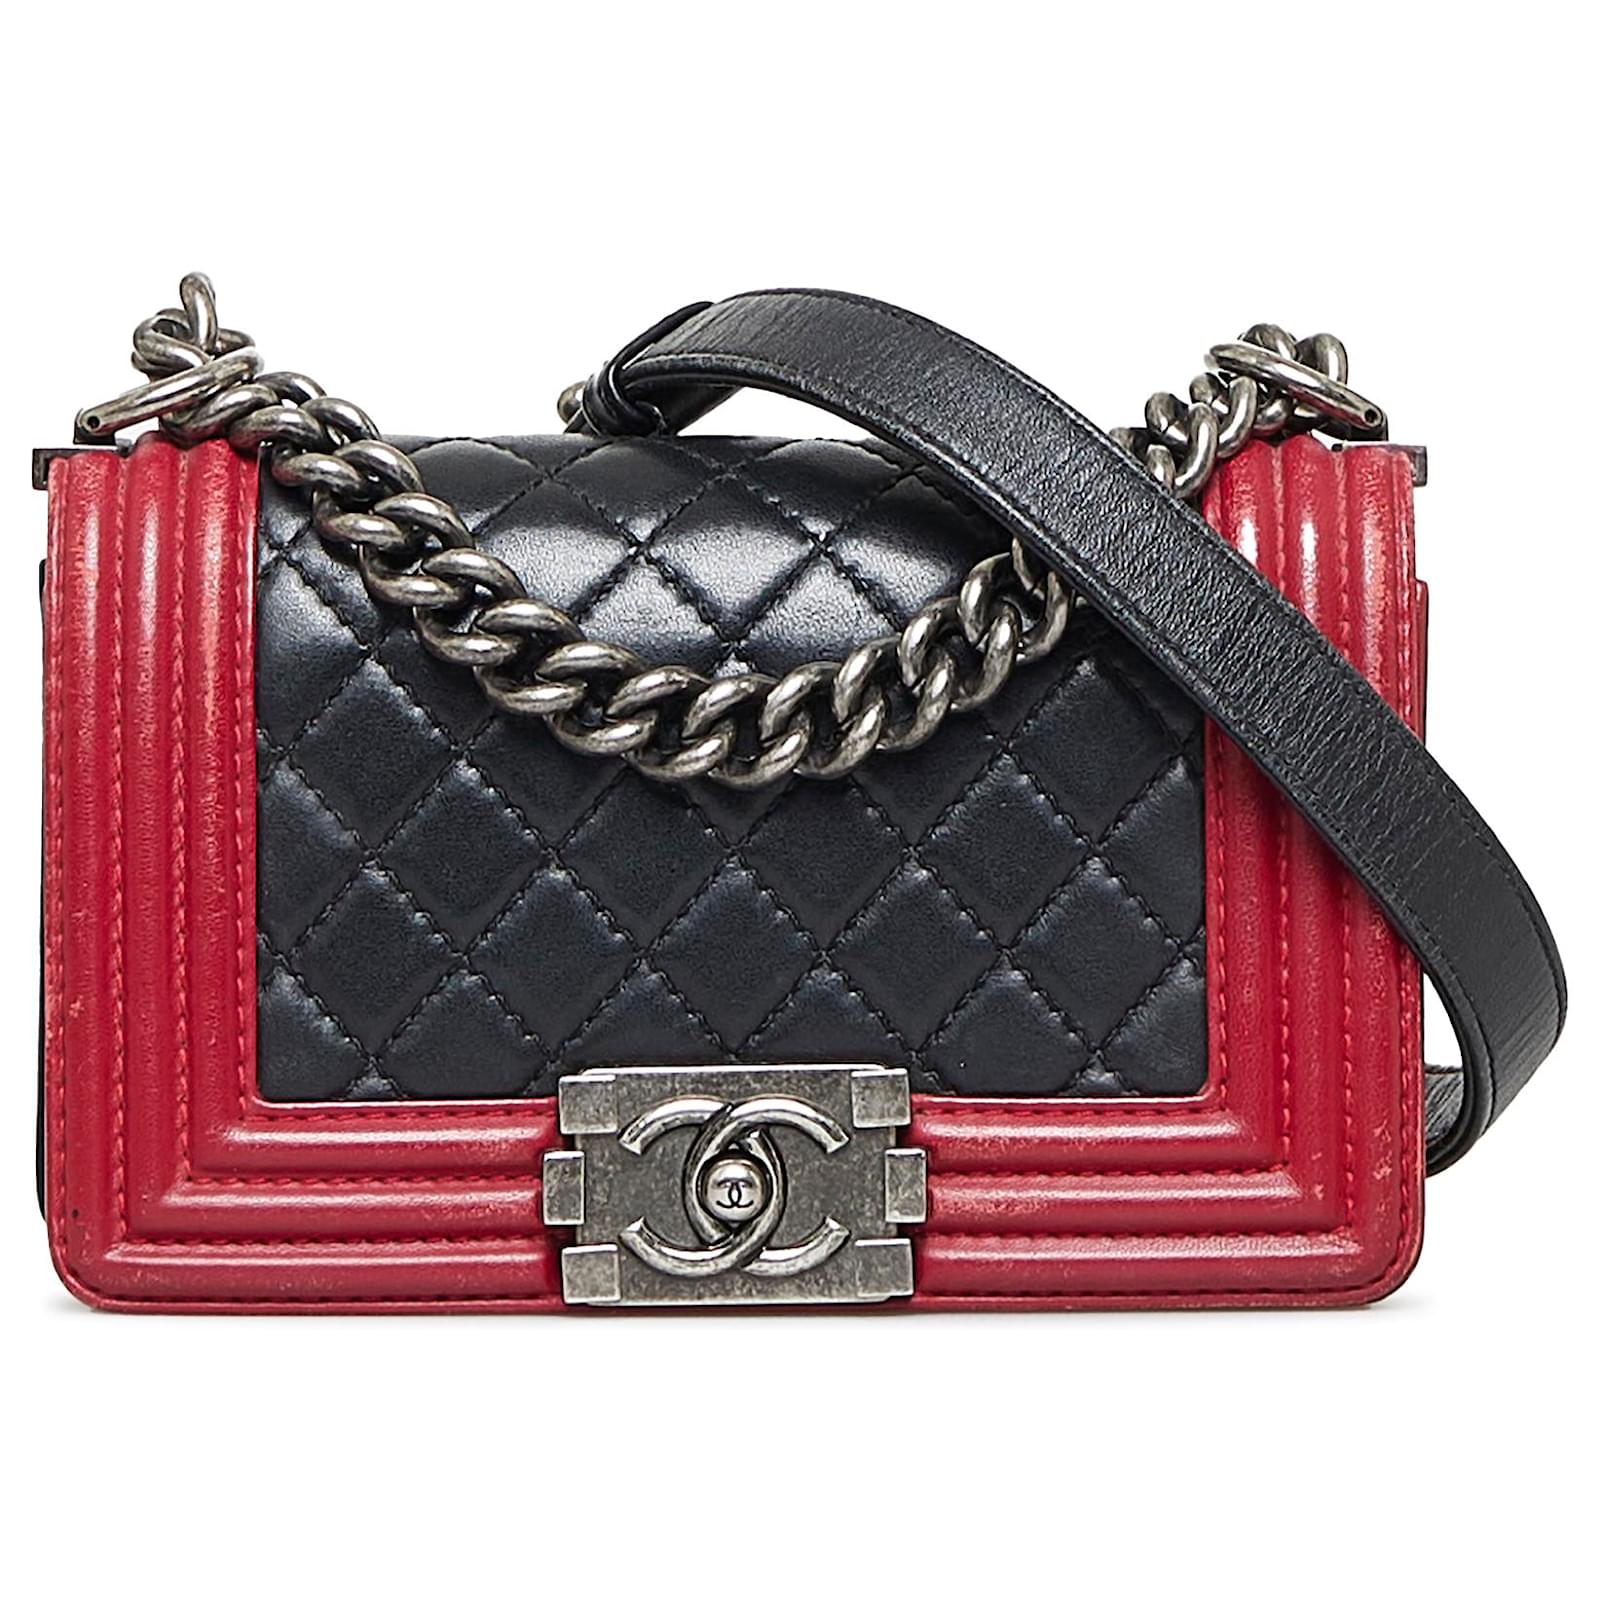 Chanel Black Small Bicolor Boy Leather Pony-style calfskin ref